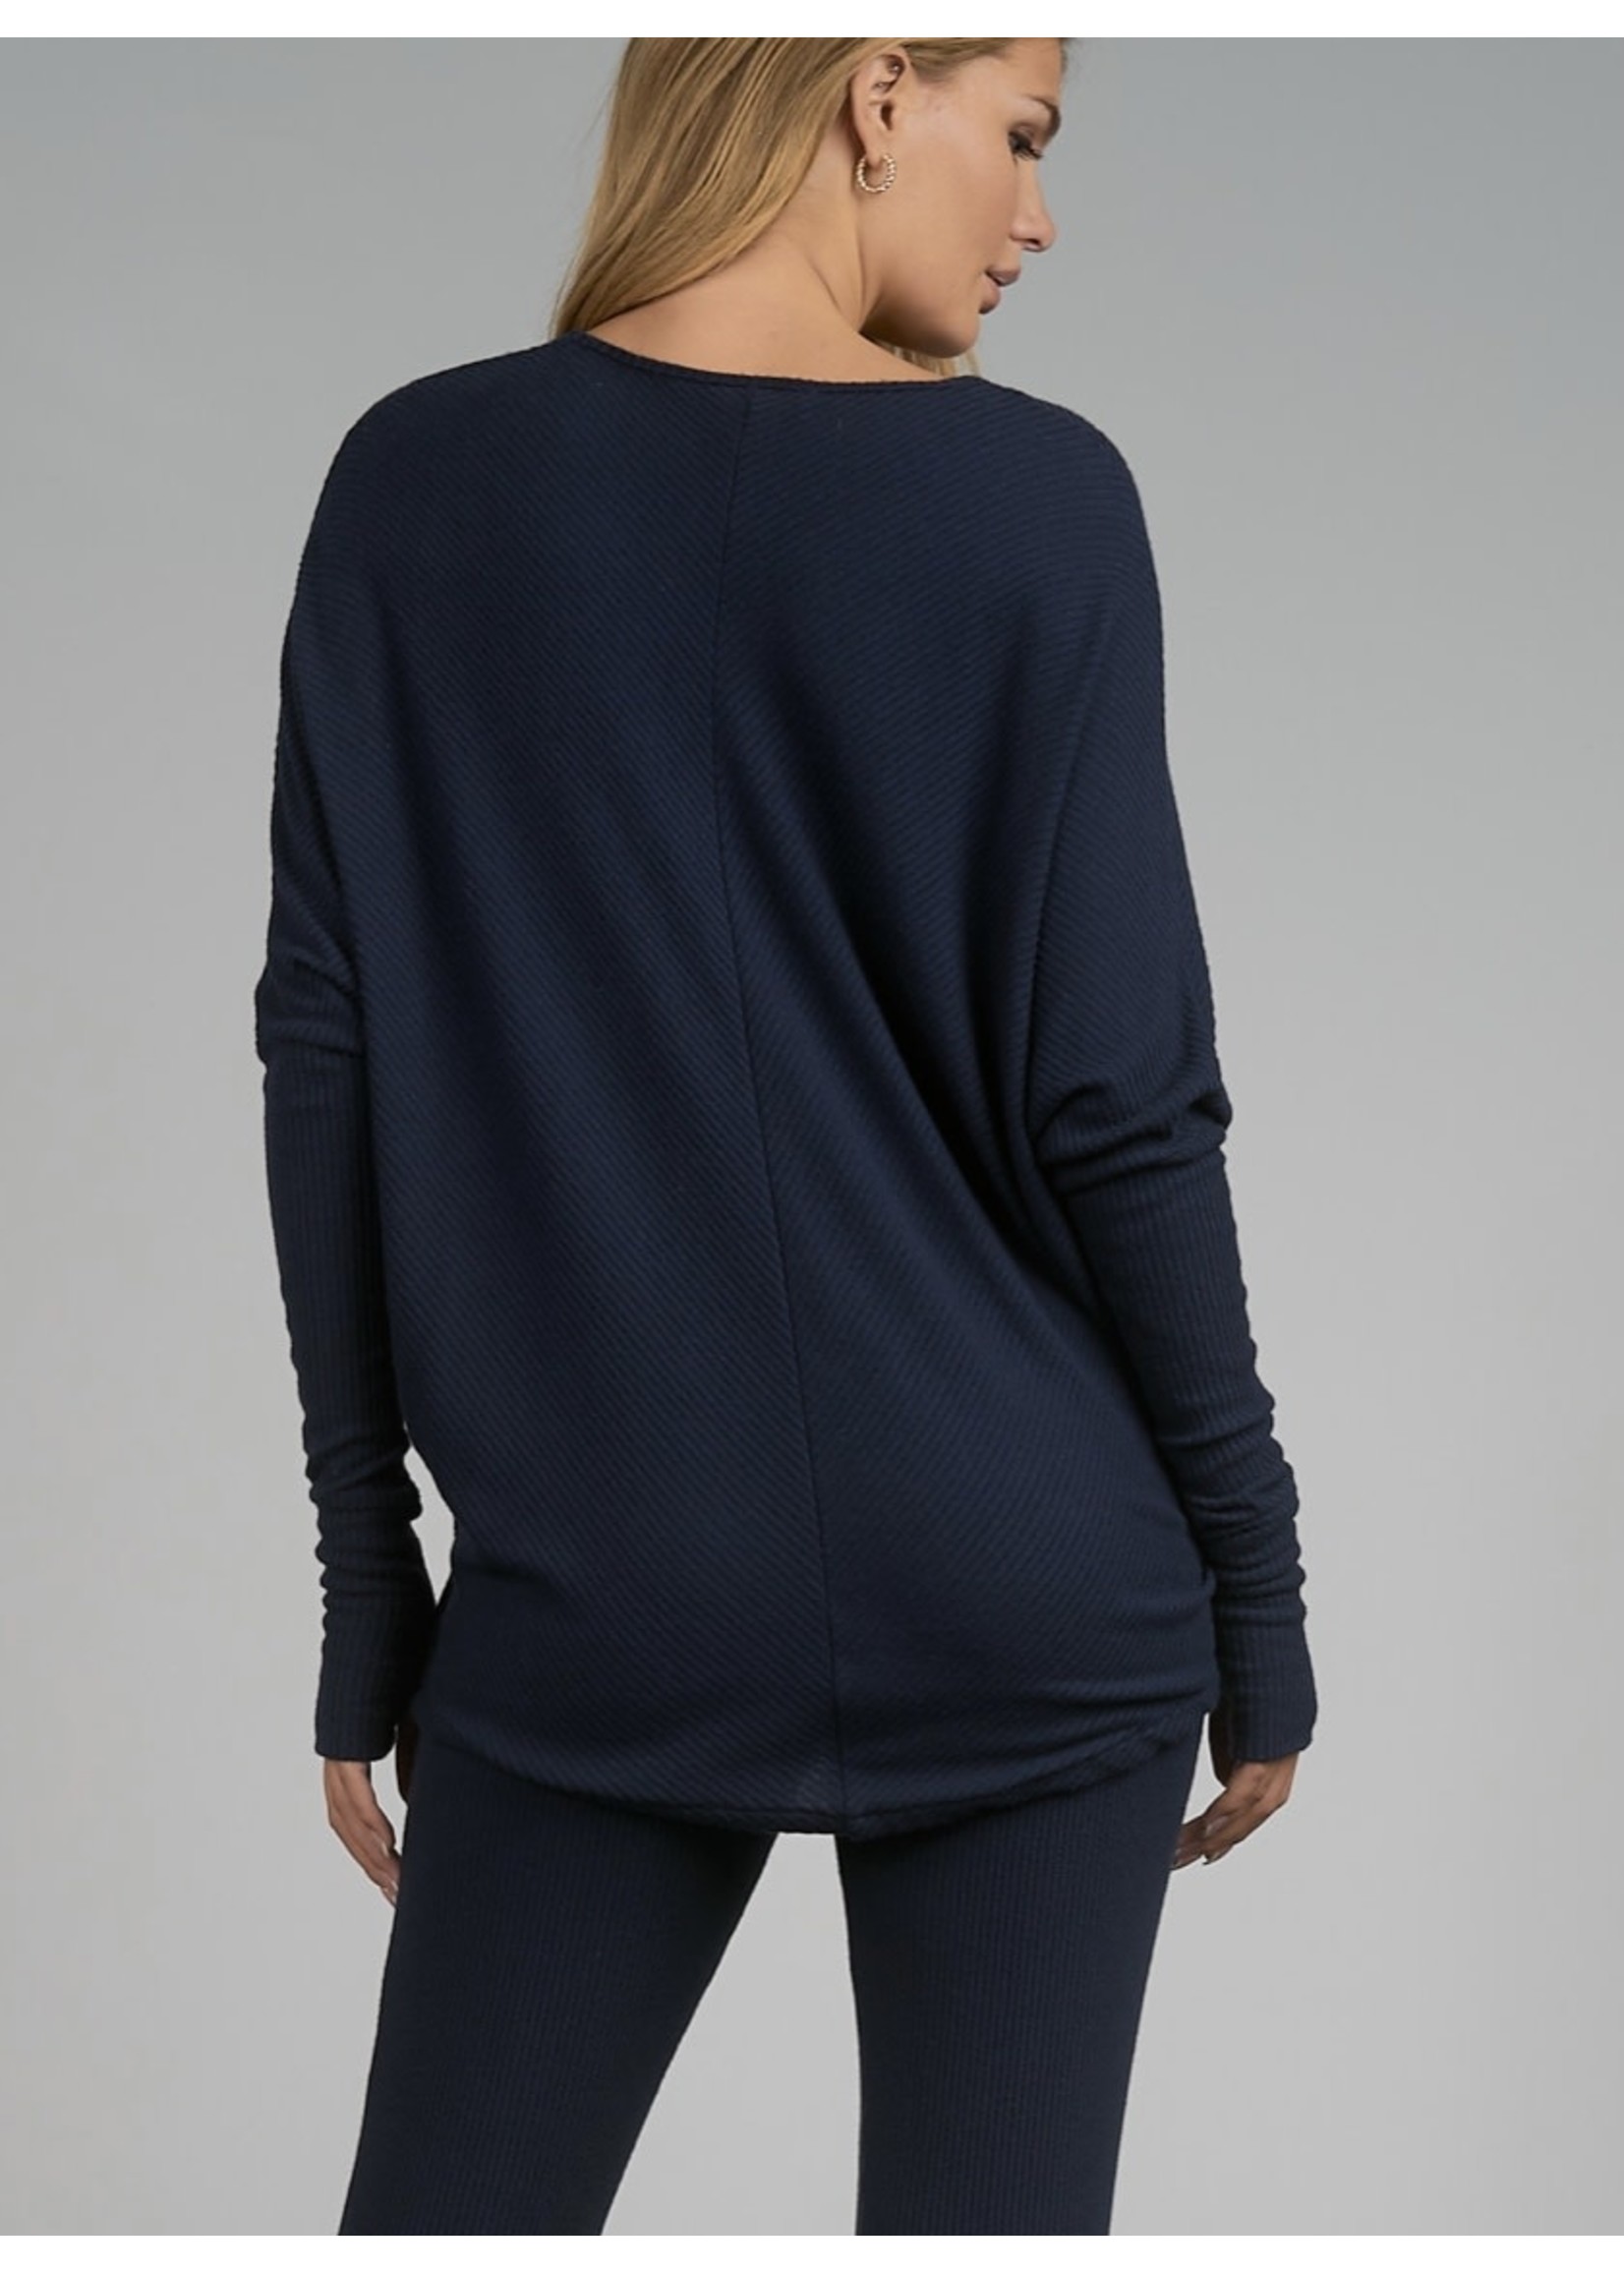 Batwing Navy Top With Thumbhole